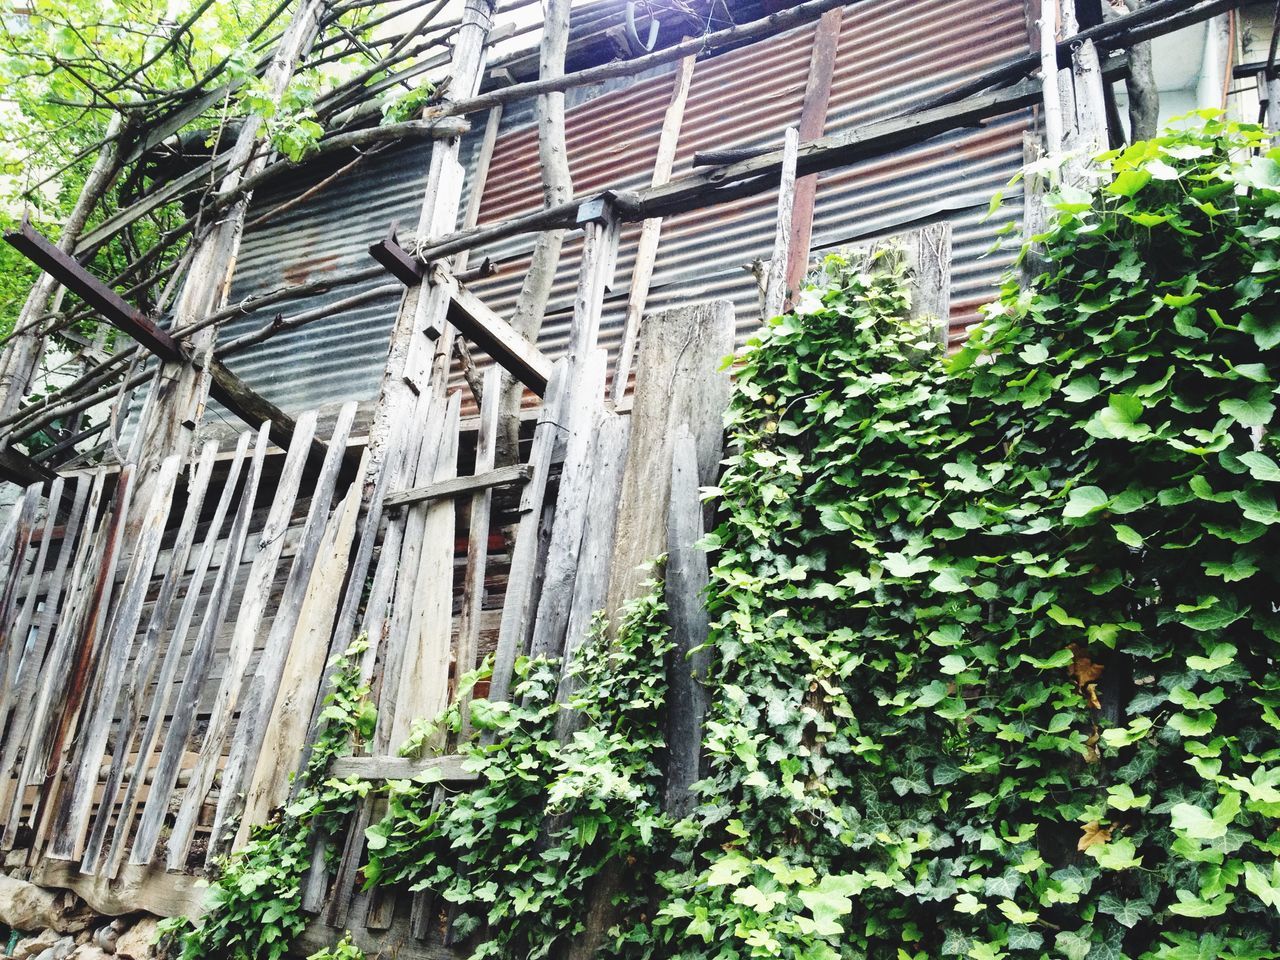 built structure, architecture, building exterior, plant, tree, growth, house, ivy, green color, residential structure, brick wall, wood - material, outdoors, day, abandoned, no people, old, building, leaf, wall - building feature